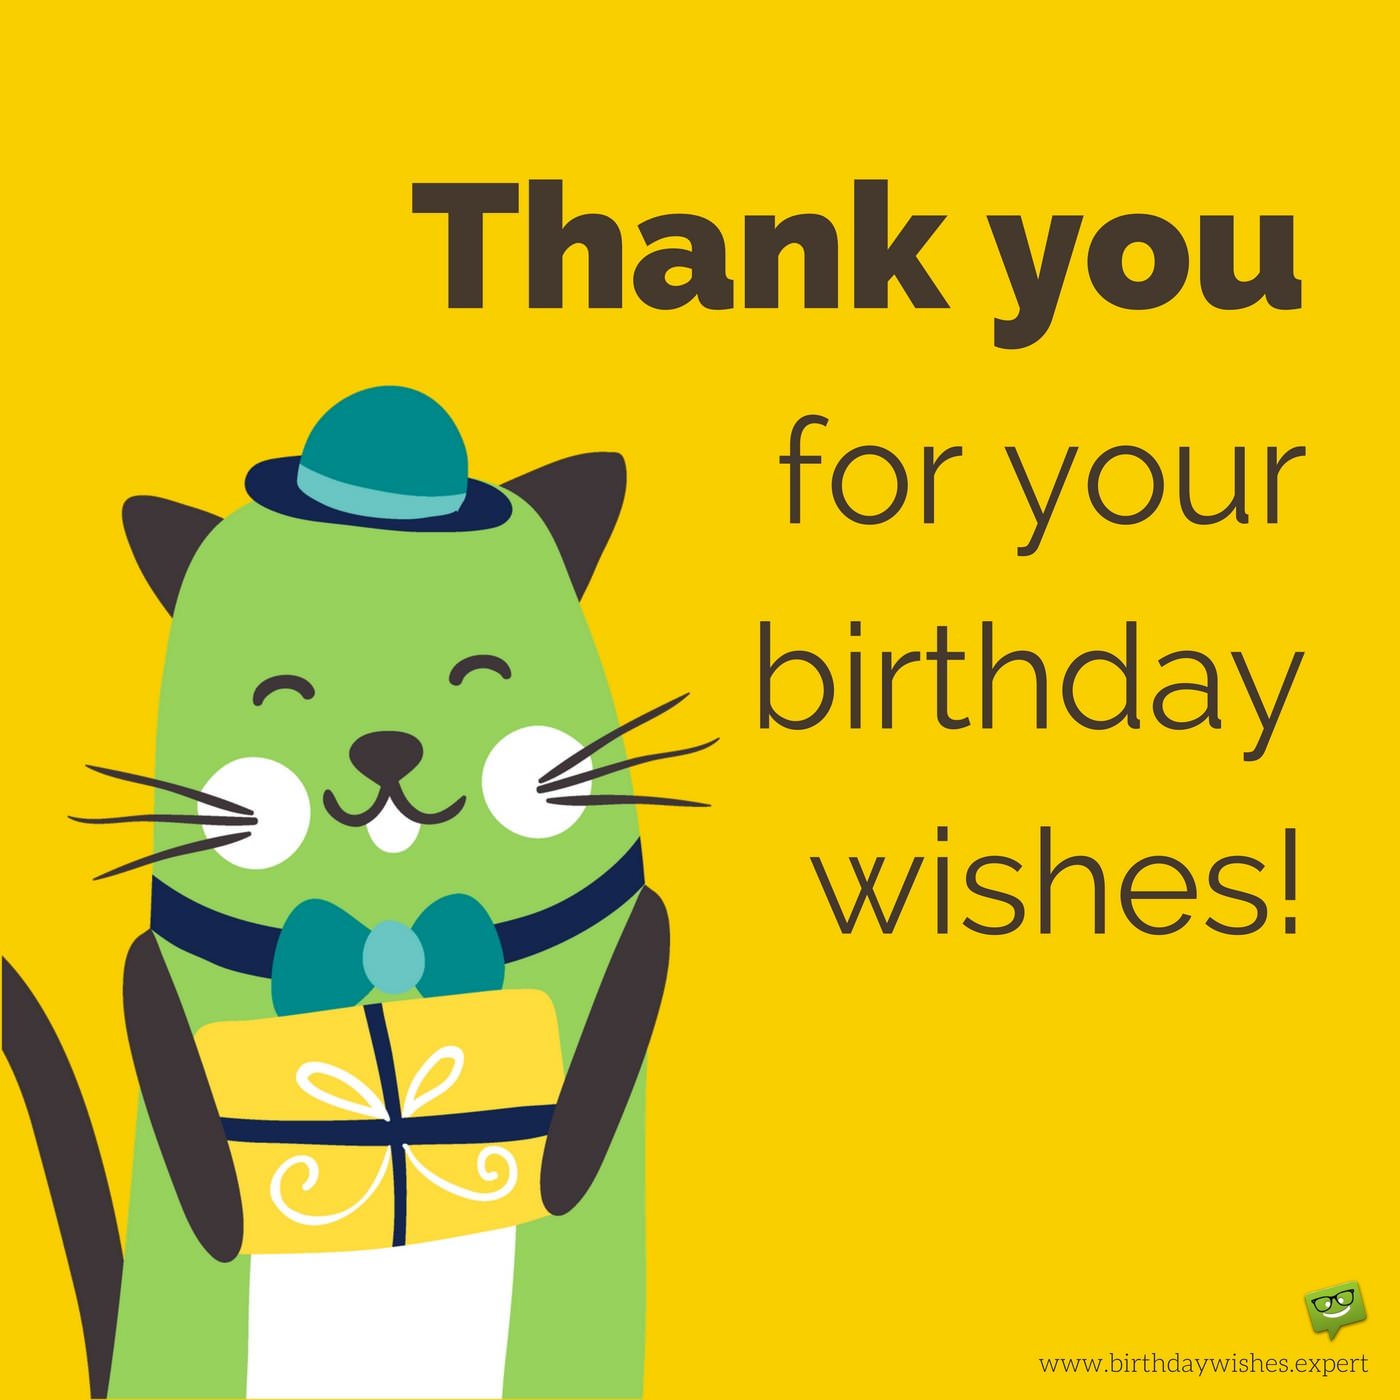 Cute Thank You For Your Birthday Wishes Message On Image With Funny